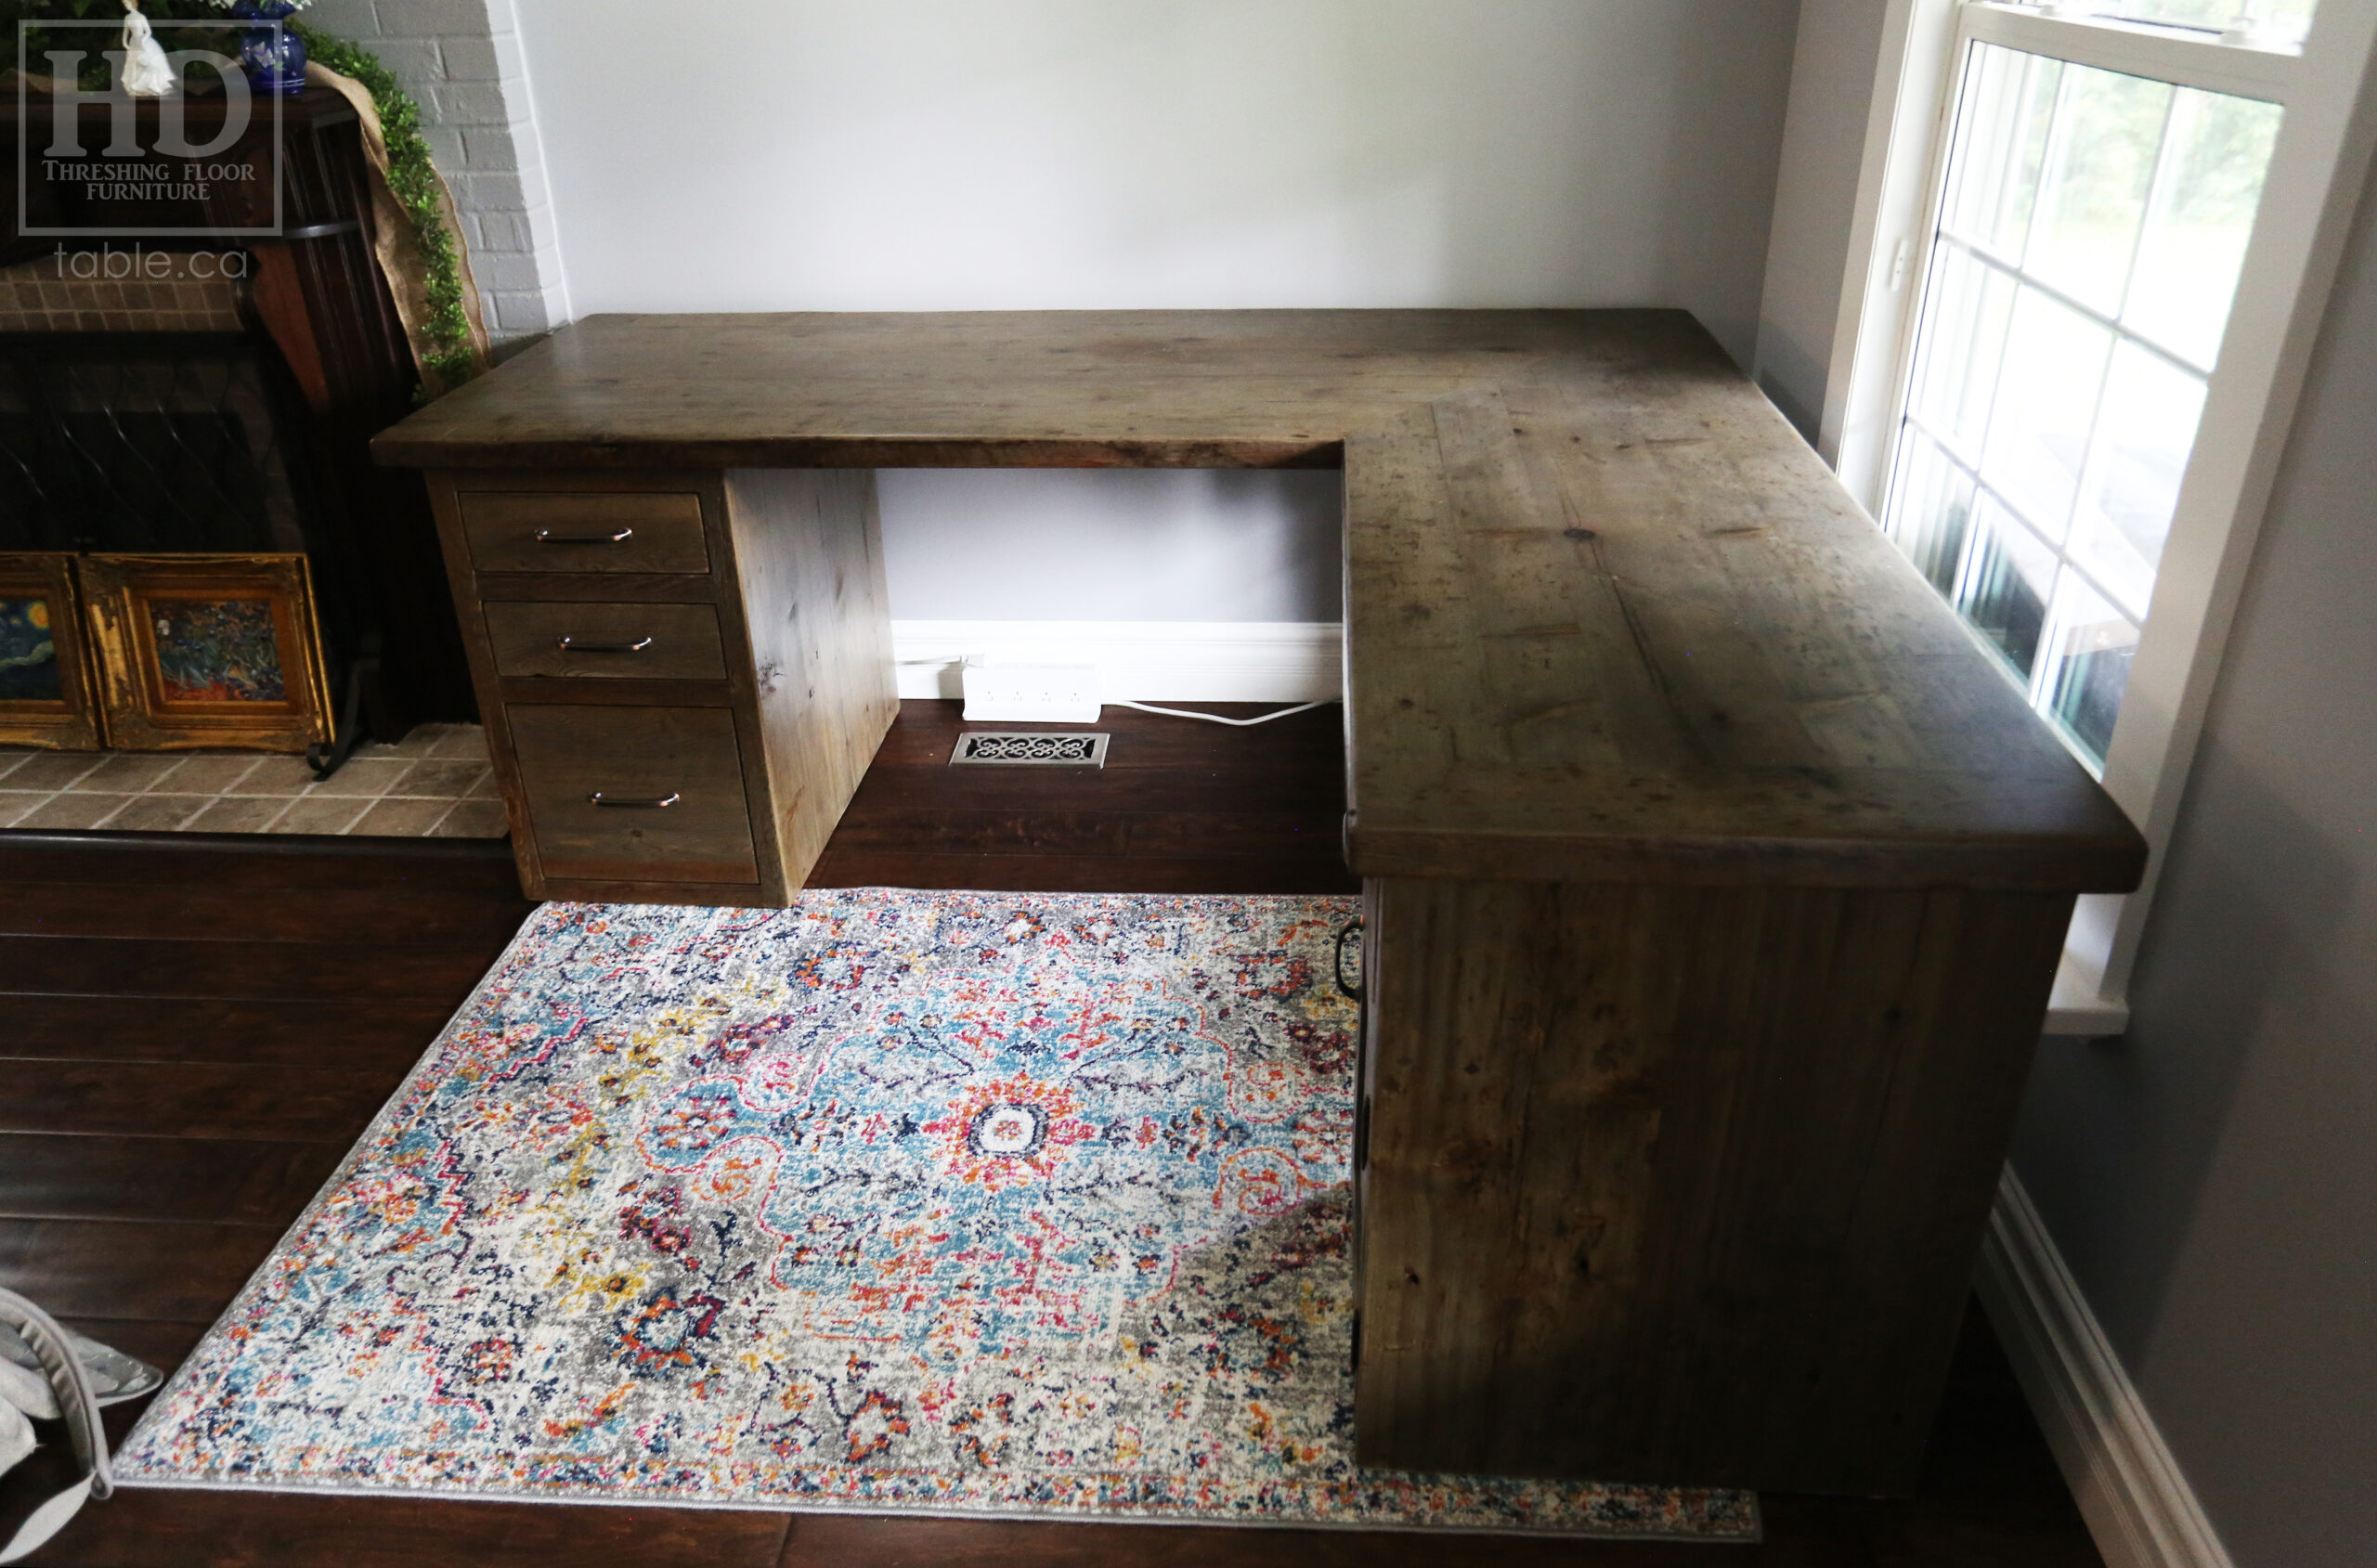 78" Ontario Barnwood Desk we made for a Woodstock home - 32" deep - 74" Return / 24" deep - 4 Drawers - 1 Door - 31" height - Left Side Drawers [18" wide] - Right Side Top Drawer / Bottom Door - Corner Post - Reclaimed Old Growth Hemlock Threshing Floor + Grainery Board Construction - Original edges + distressing maintained - Cast Brass Lee Valley Hardware - Barnboard Grey Option [speciality finish] - Premium epoxy + matte polyurethane finish - www.table.ca